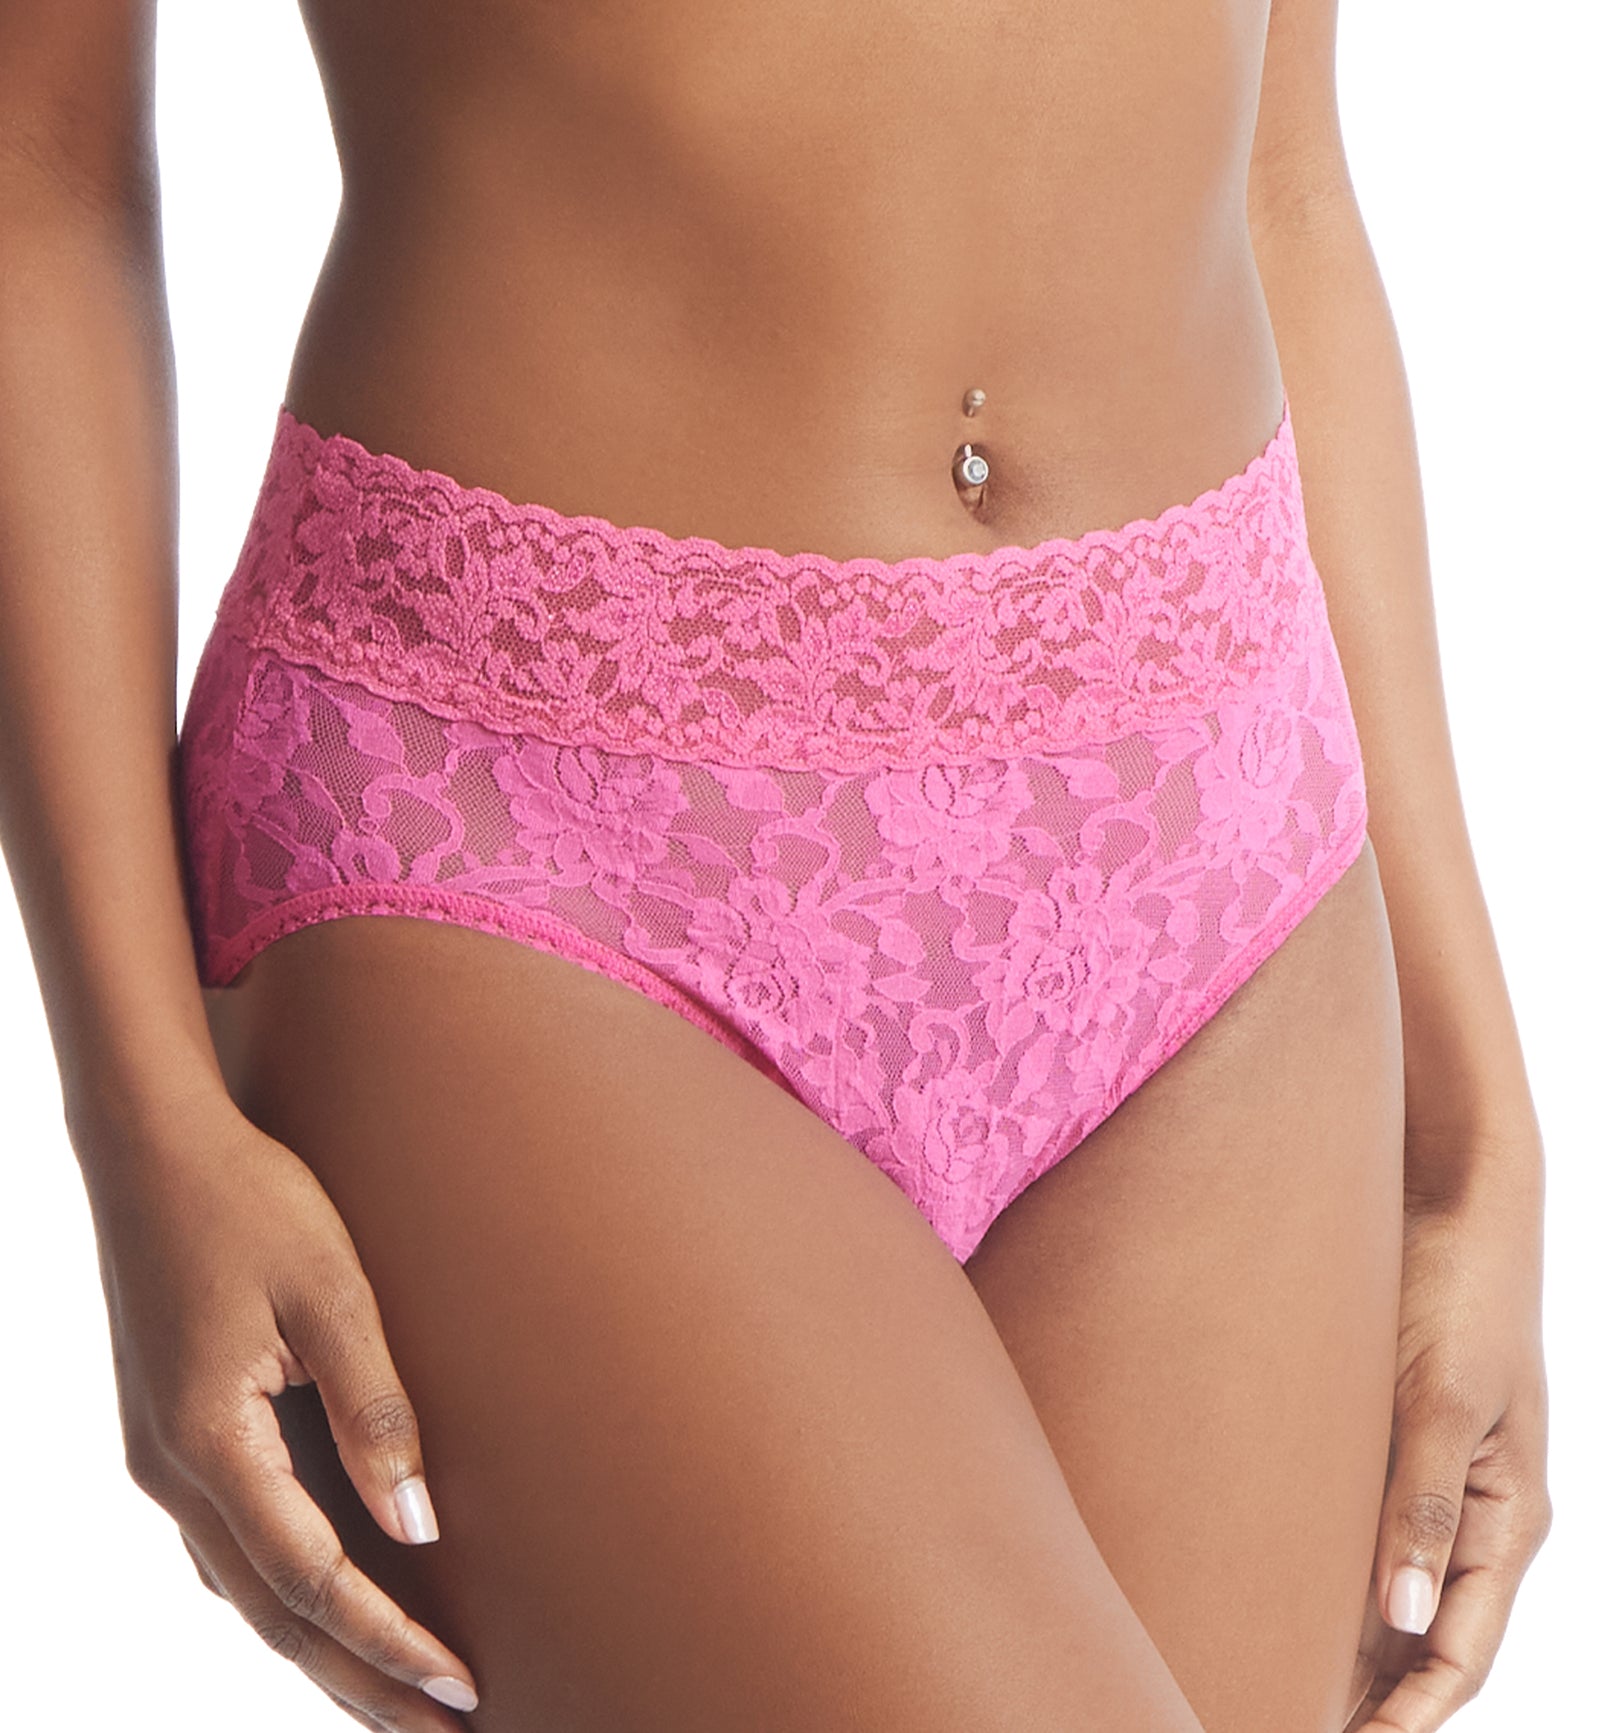 Hanky Panky Signature Lace French Brief (461),Small,Intuition - Intuition,Small